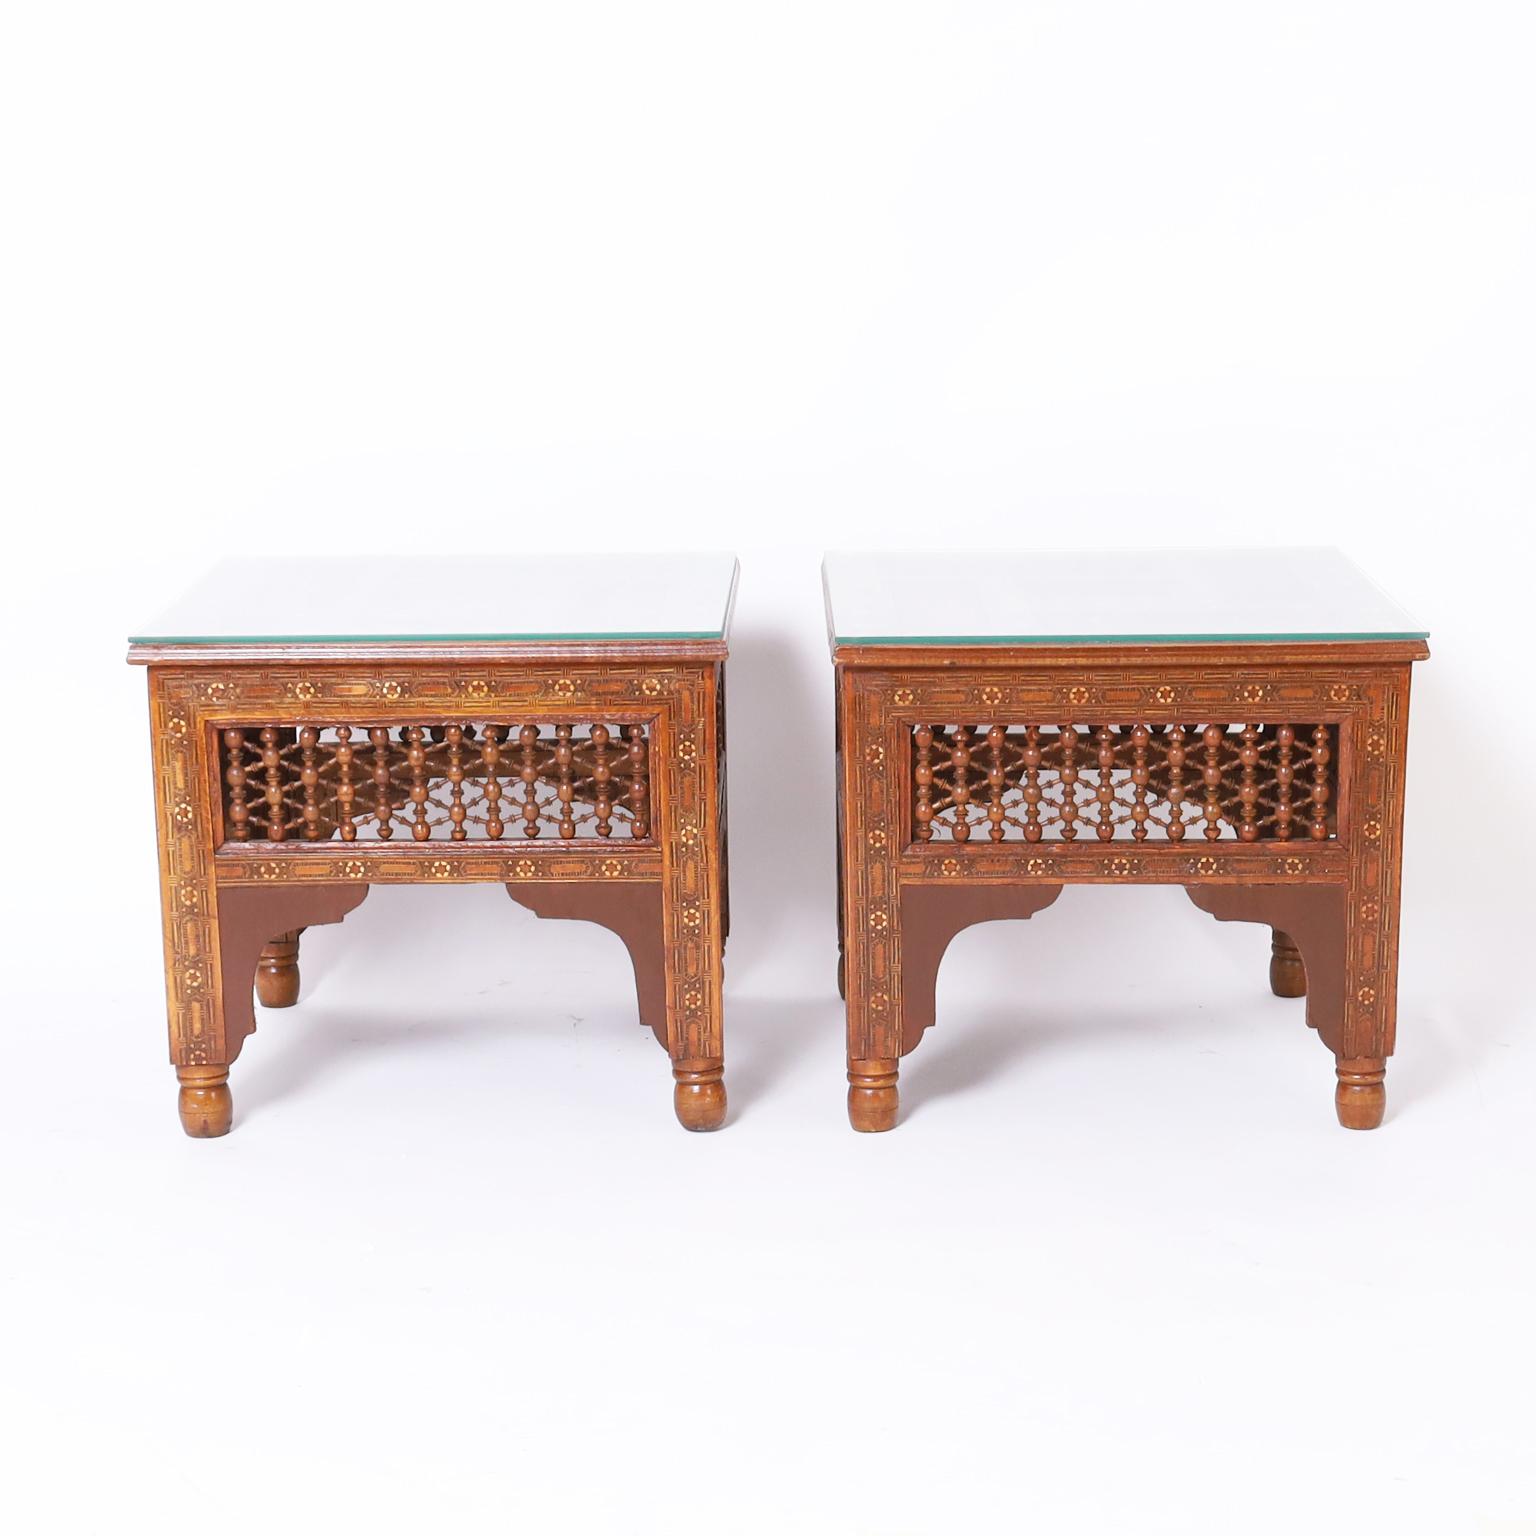 Intriguing pair of antique Moroccan stands with or without glass tops crafted in walnut featuring geometric inlays of bone, ebony, and kingwood, stick and ball panels, moorish arches, and turned feet.